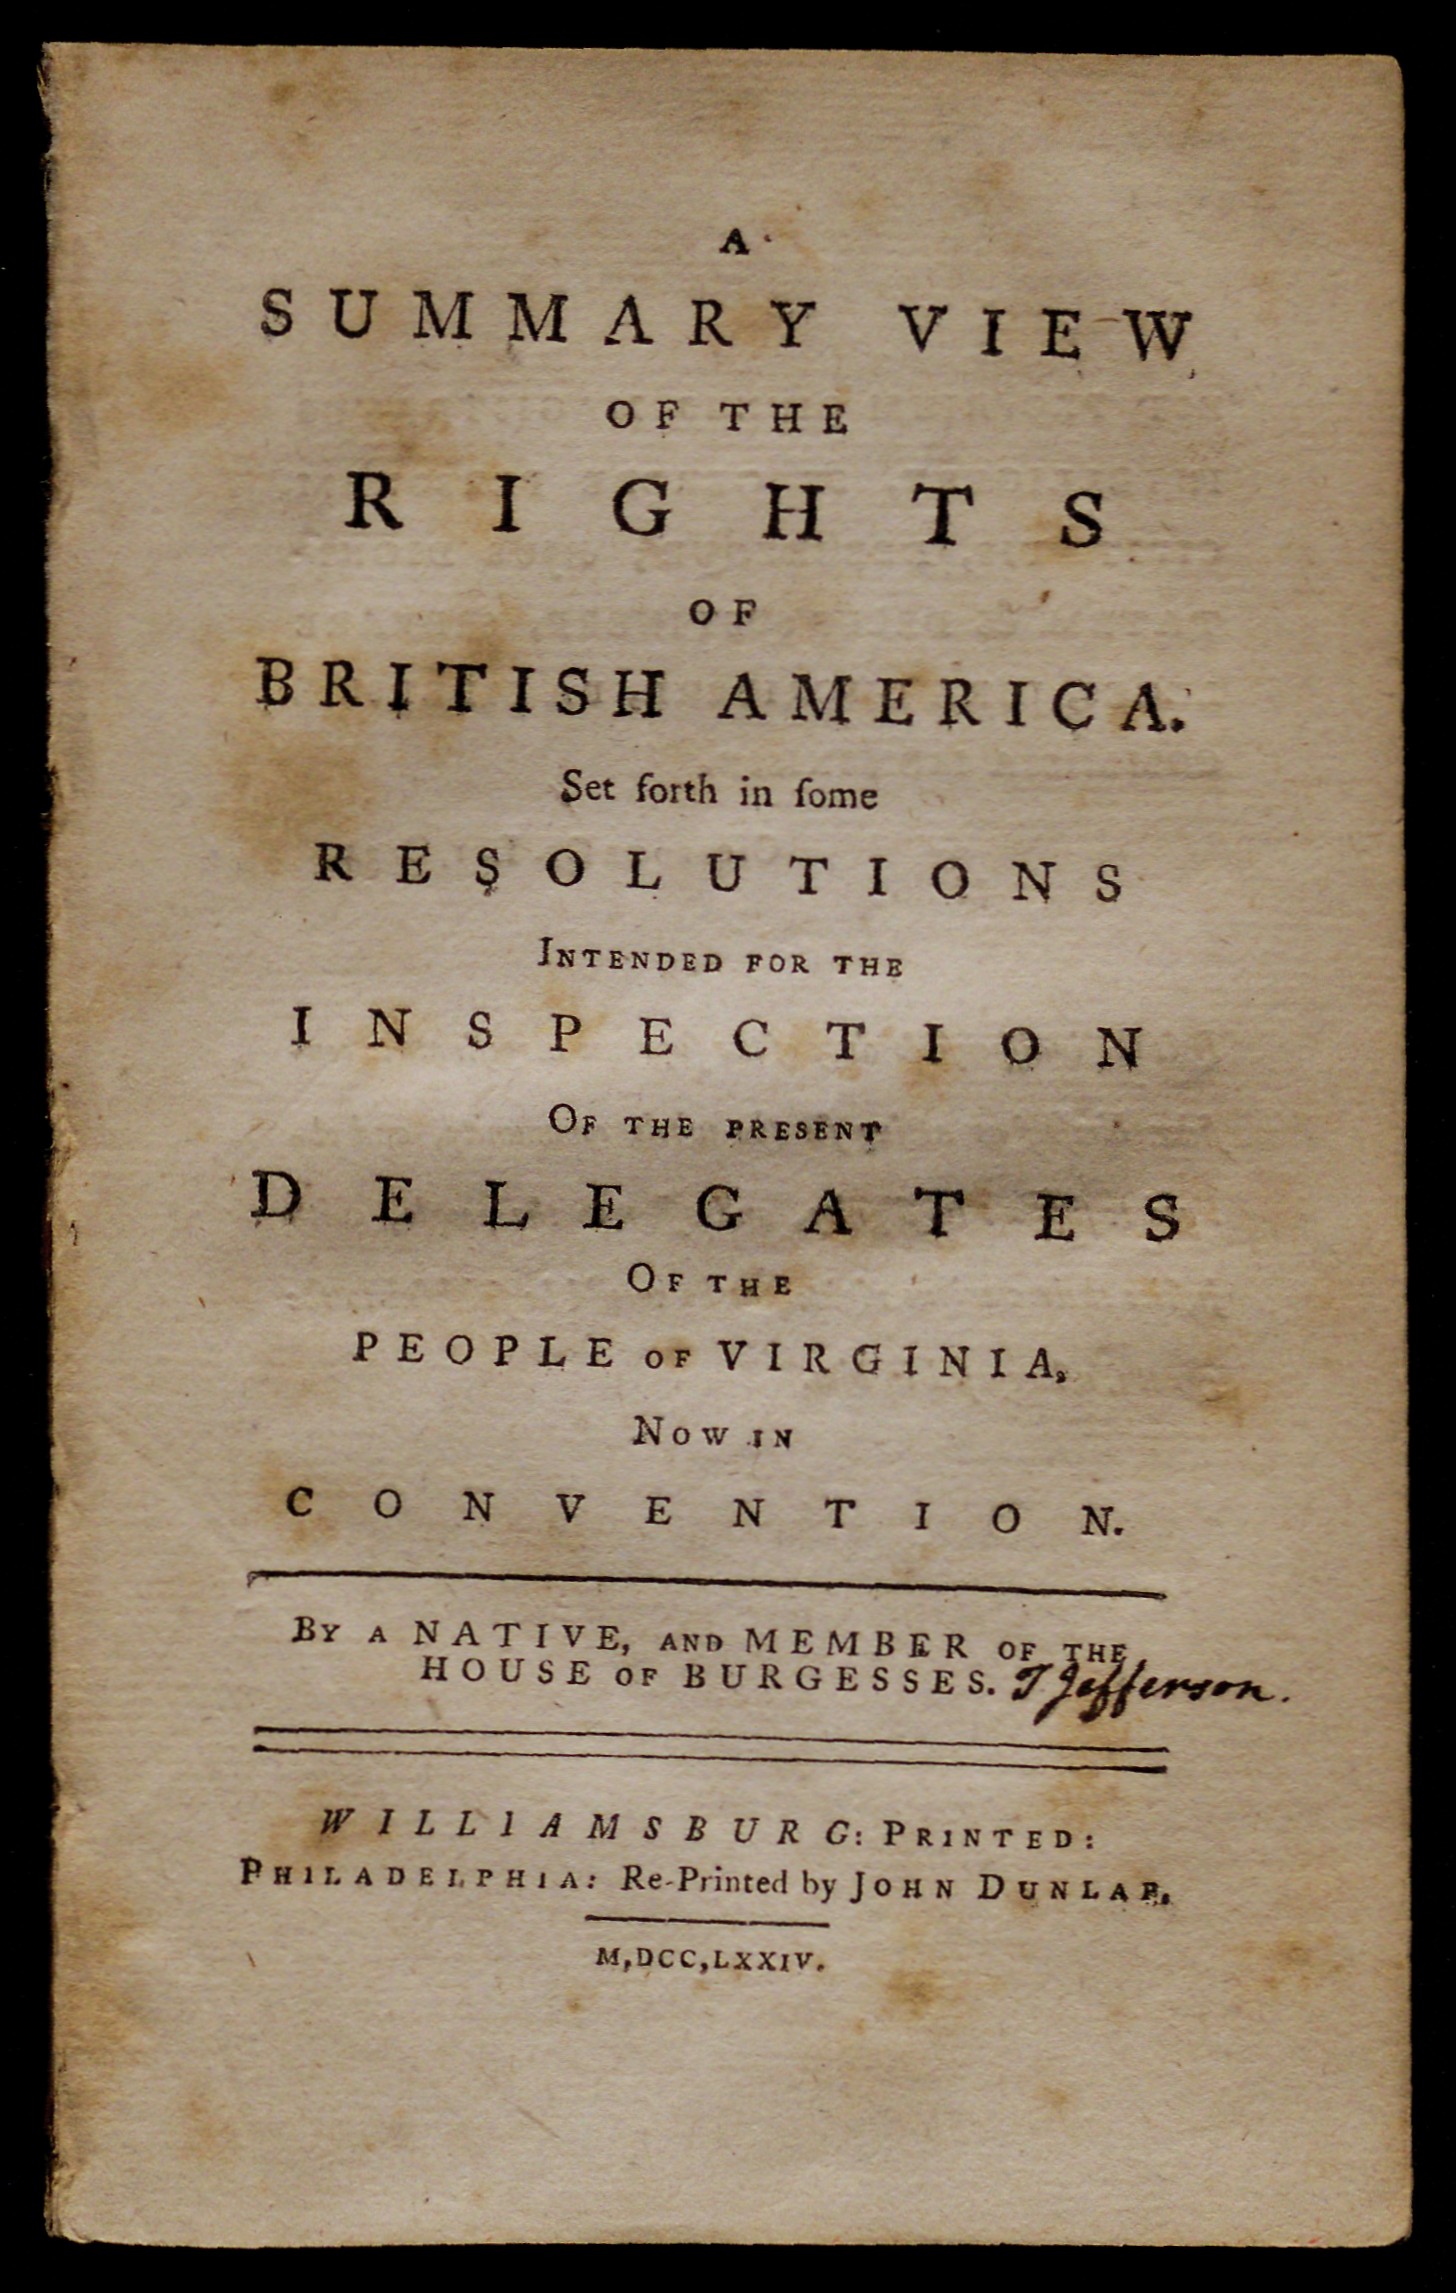 A Summary View of the Rights of British America by Thomas Jefferson, 1774 (Gilder Lehrman Institute, GLC00962)